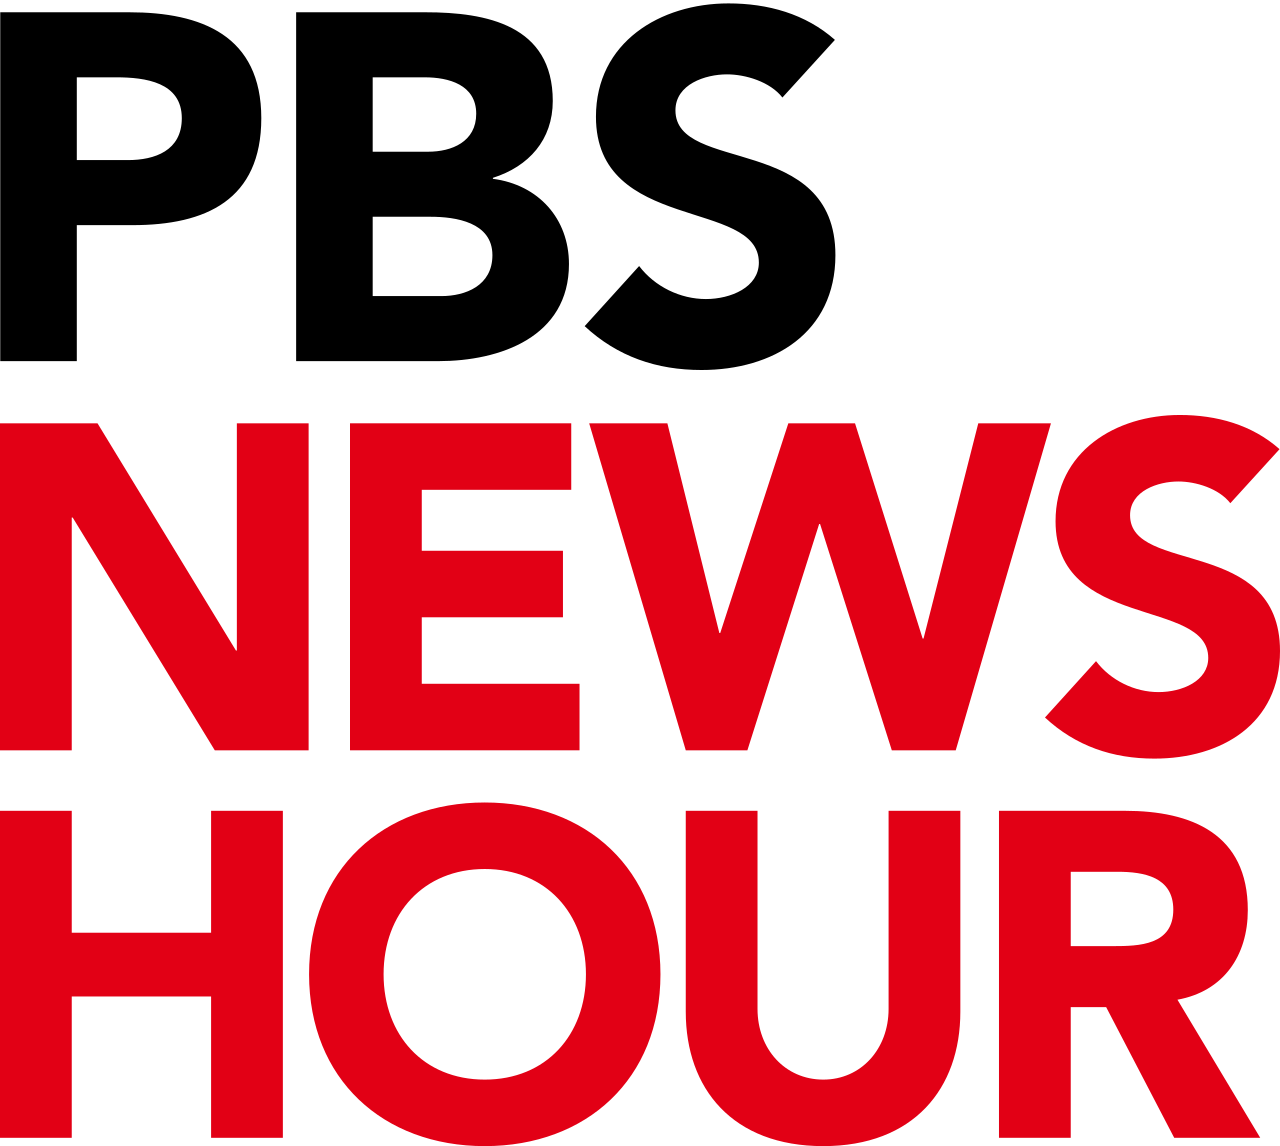 PBS_News_Hour_Square_Logo_2020.svg.png